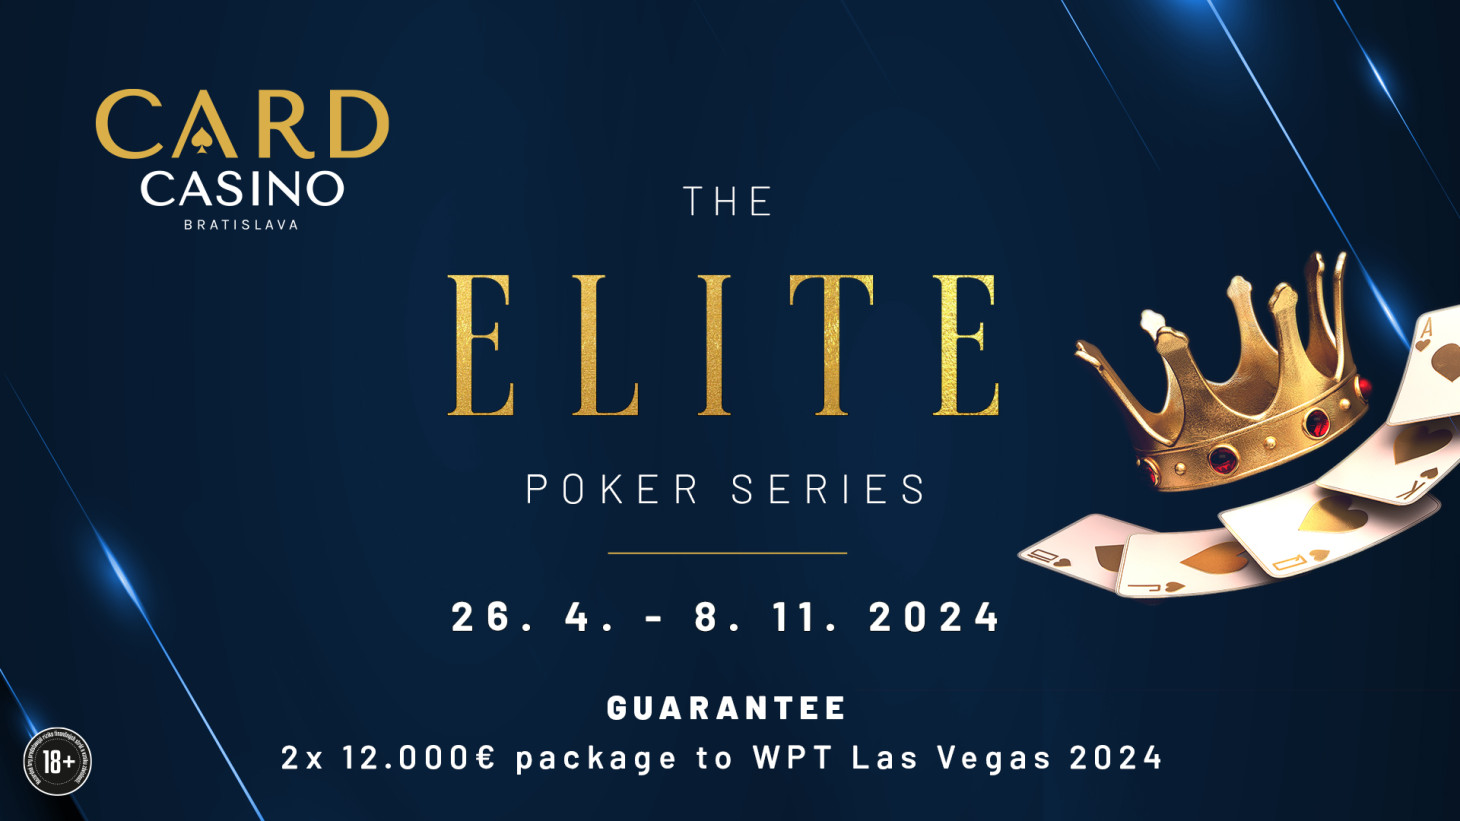 The new ELITE Series starts. Hundreds of thousands and packages to Las Vegas are up for grabs